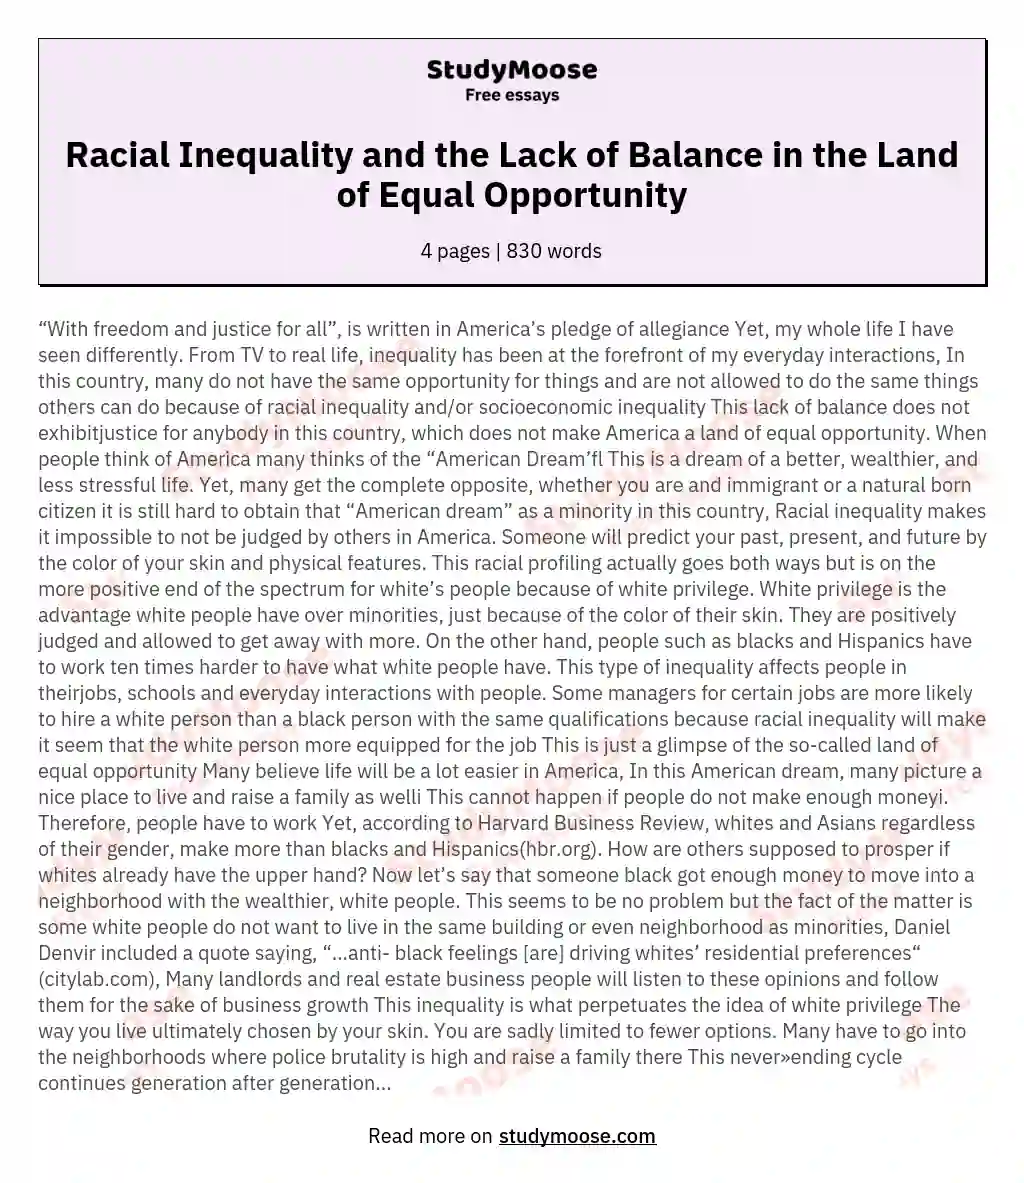 Racial Inequality and the Lack of Balance in the Land of Equal Opportunity essay